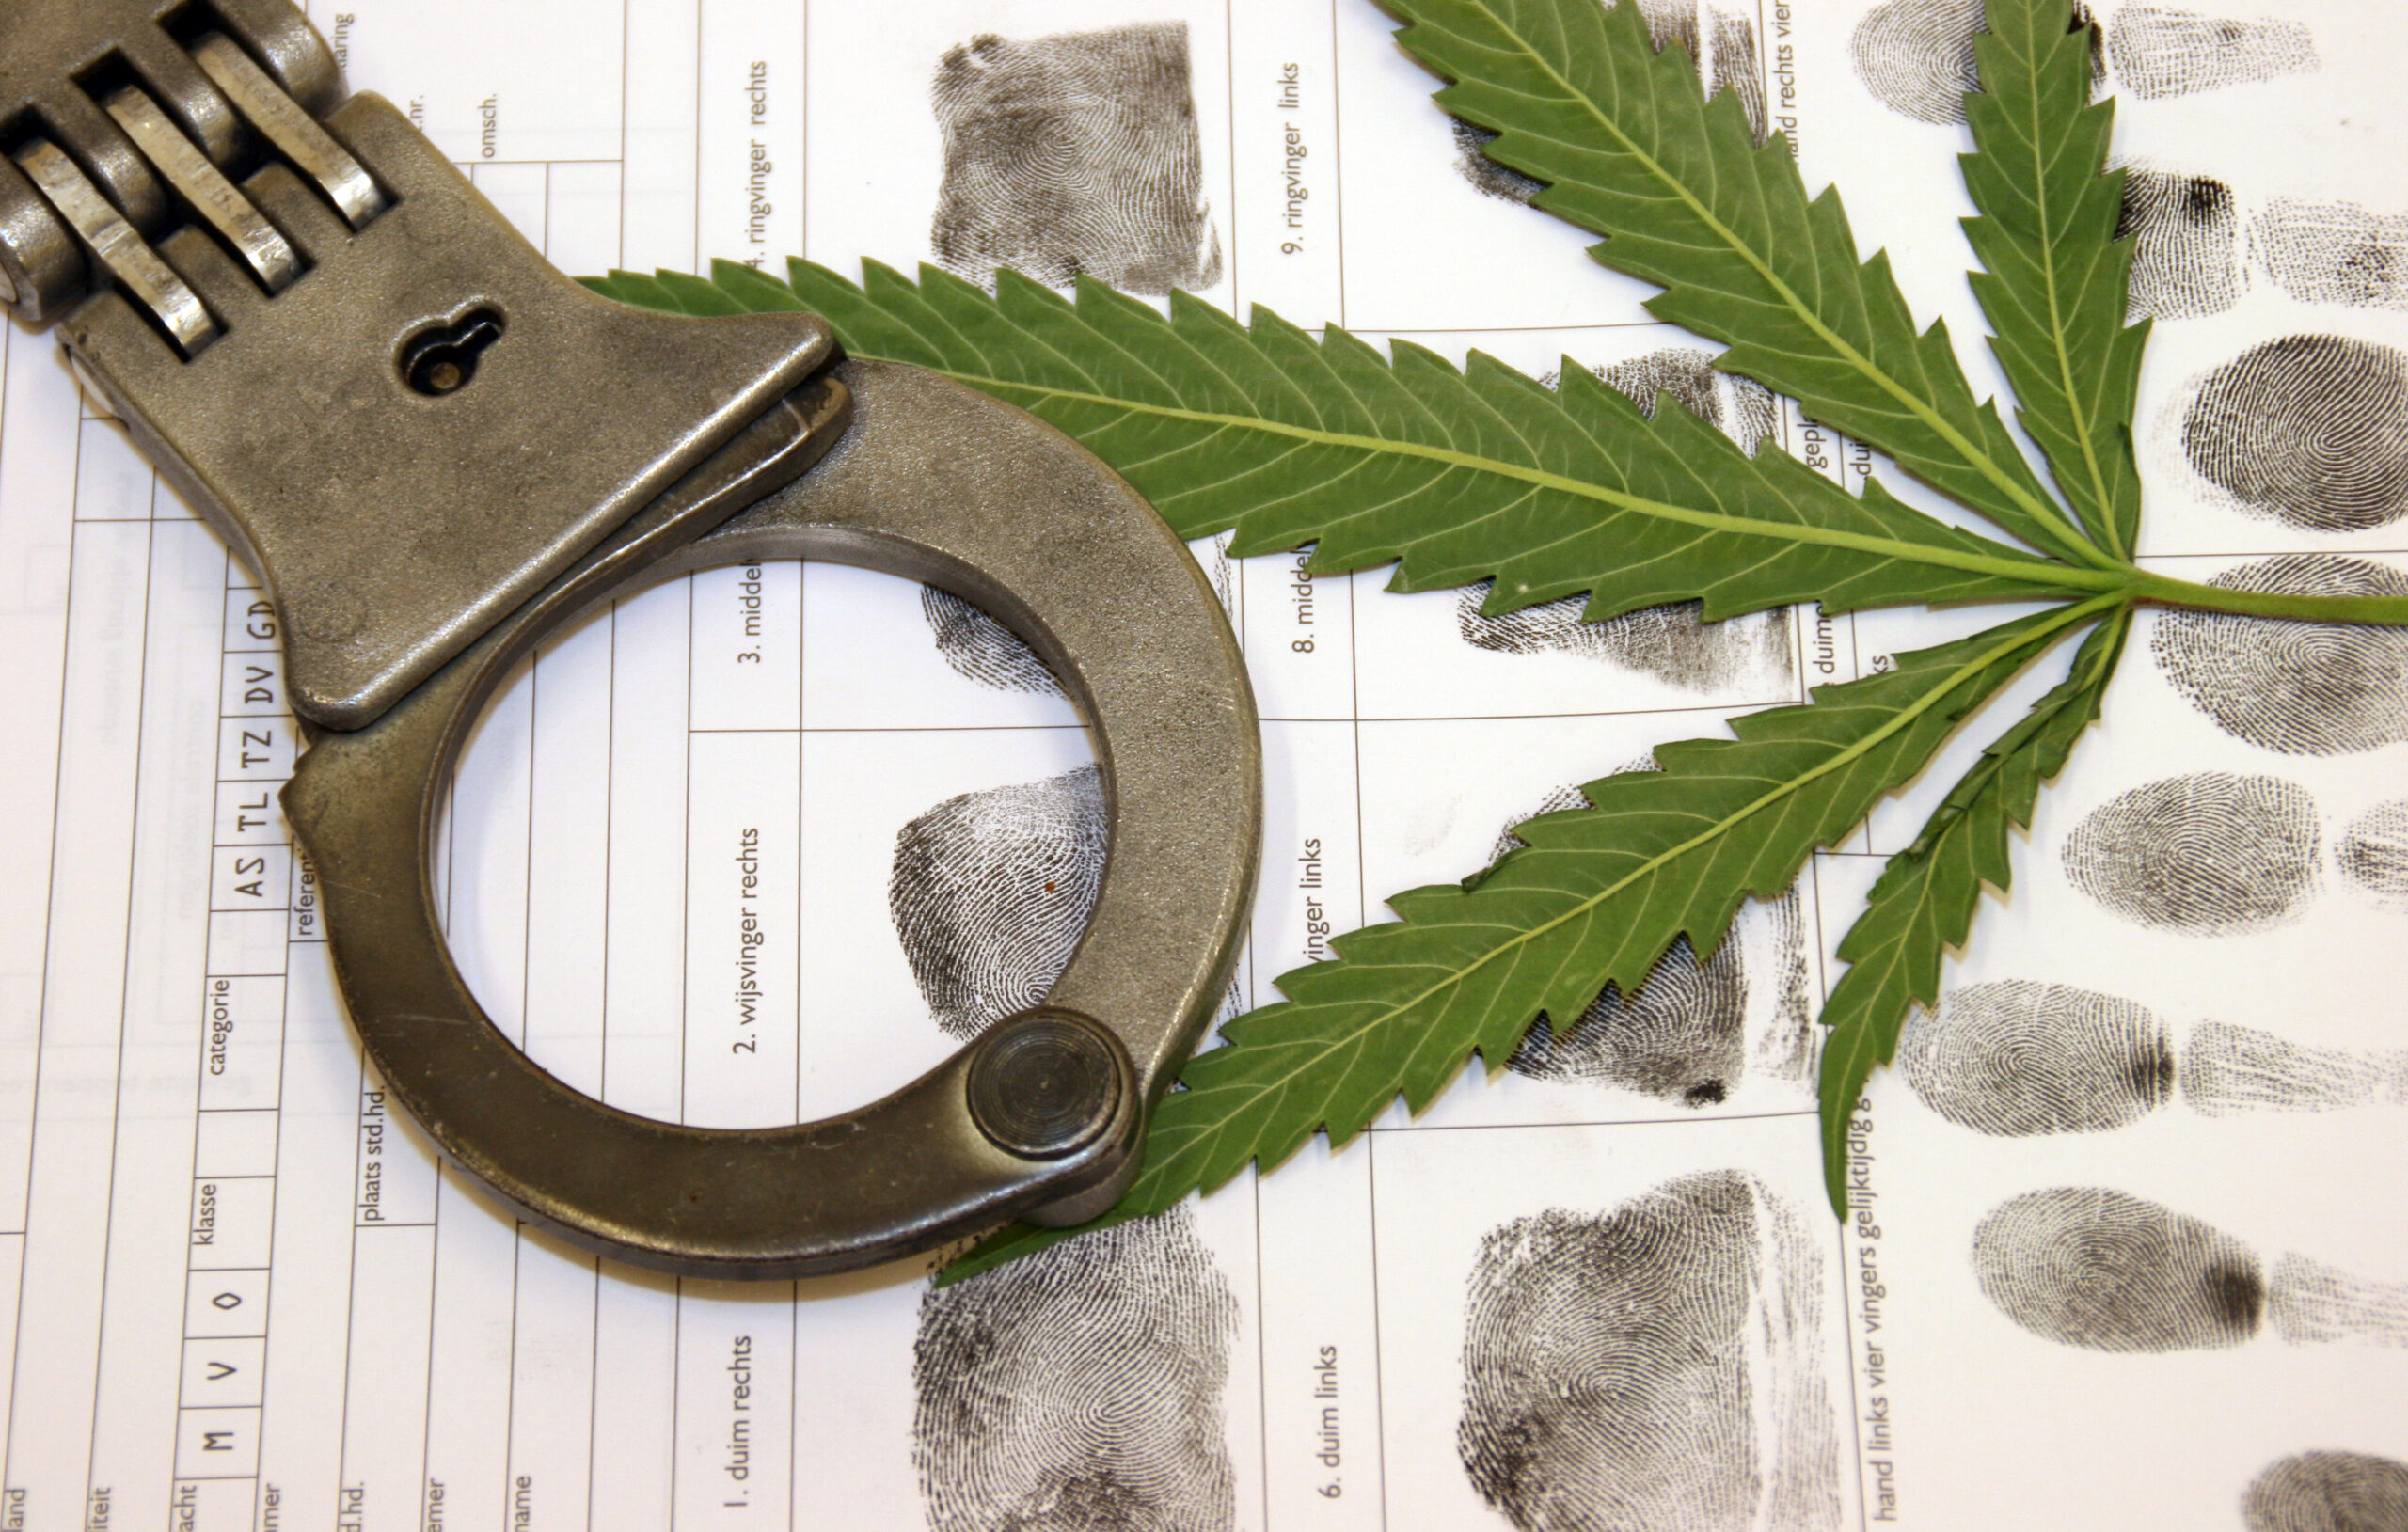 How to Get Cannabis Crimes Expunged From Your Record in California